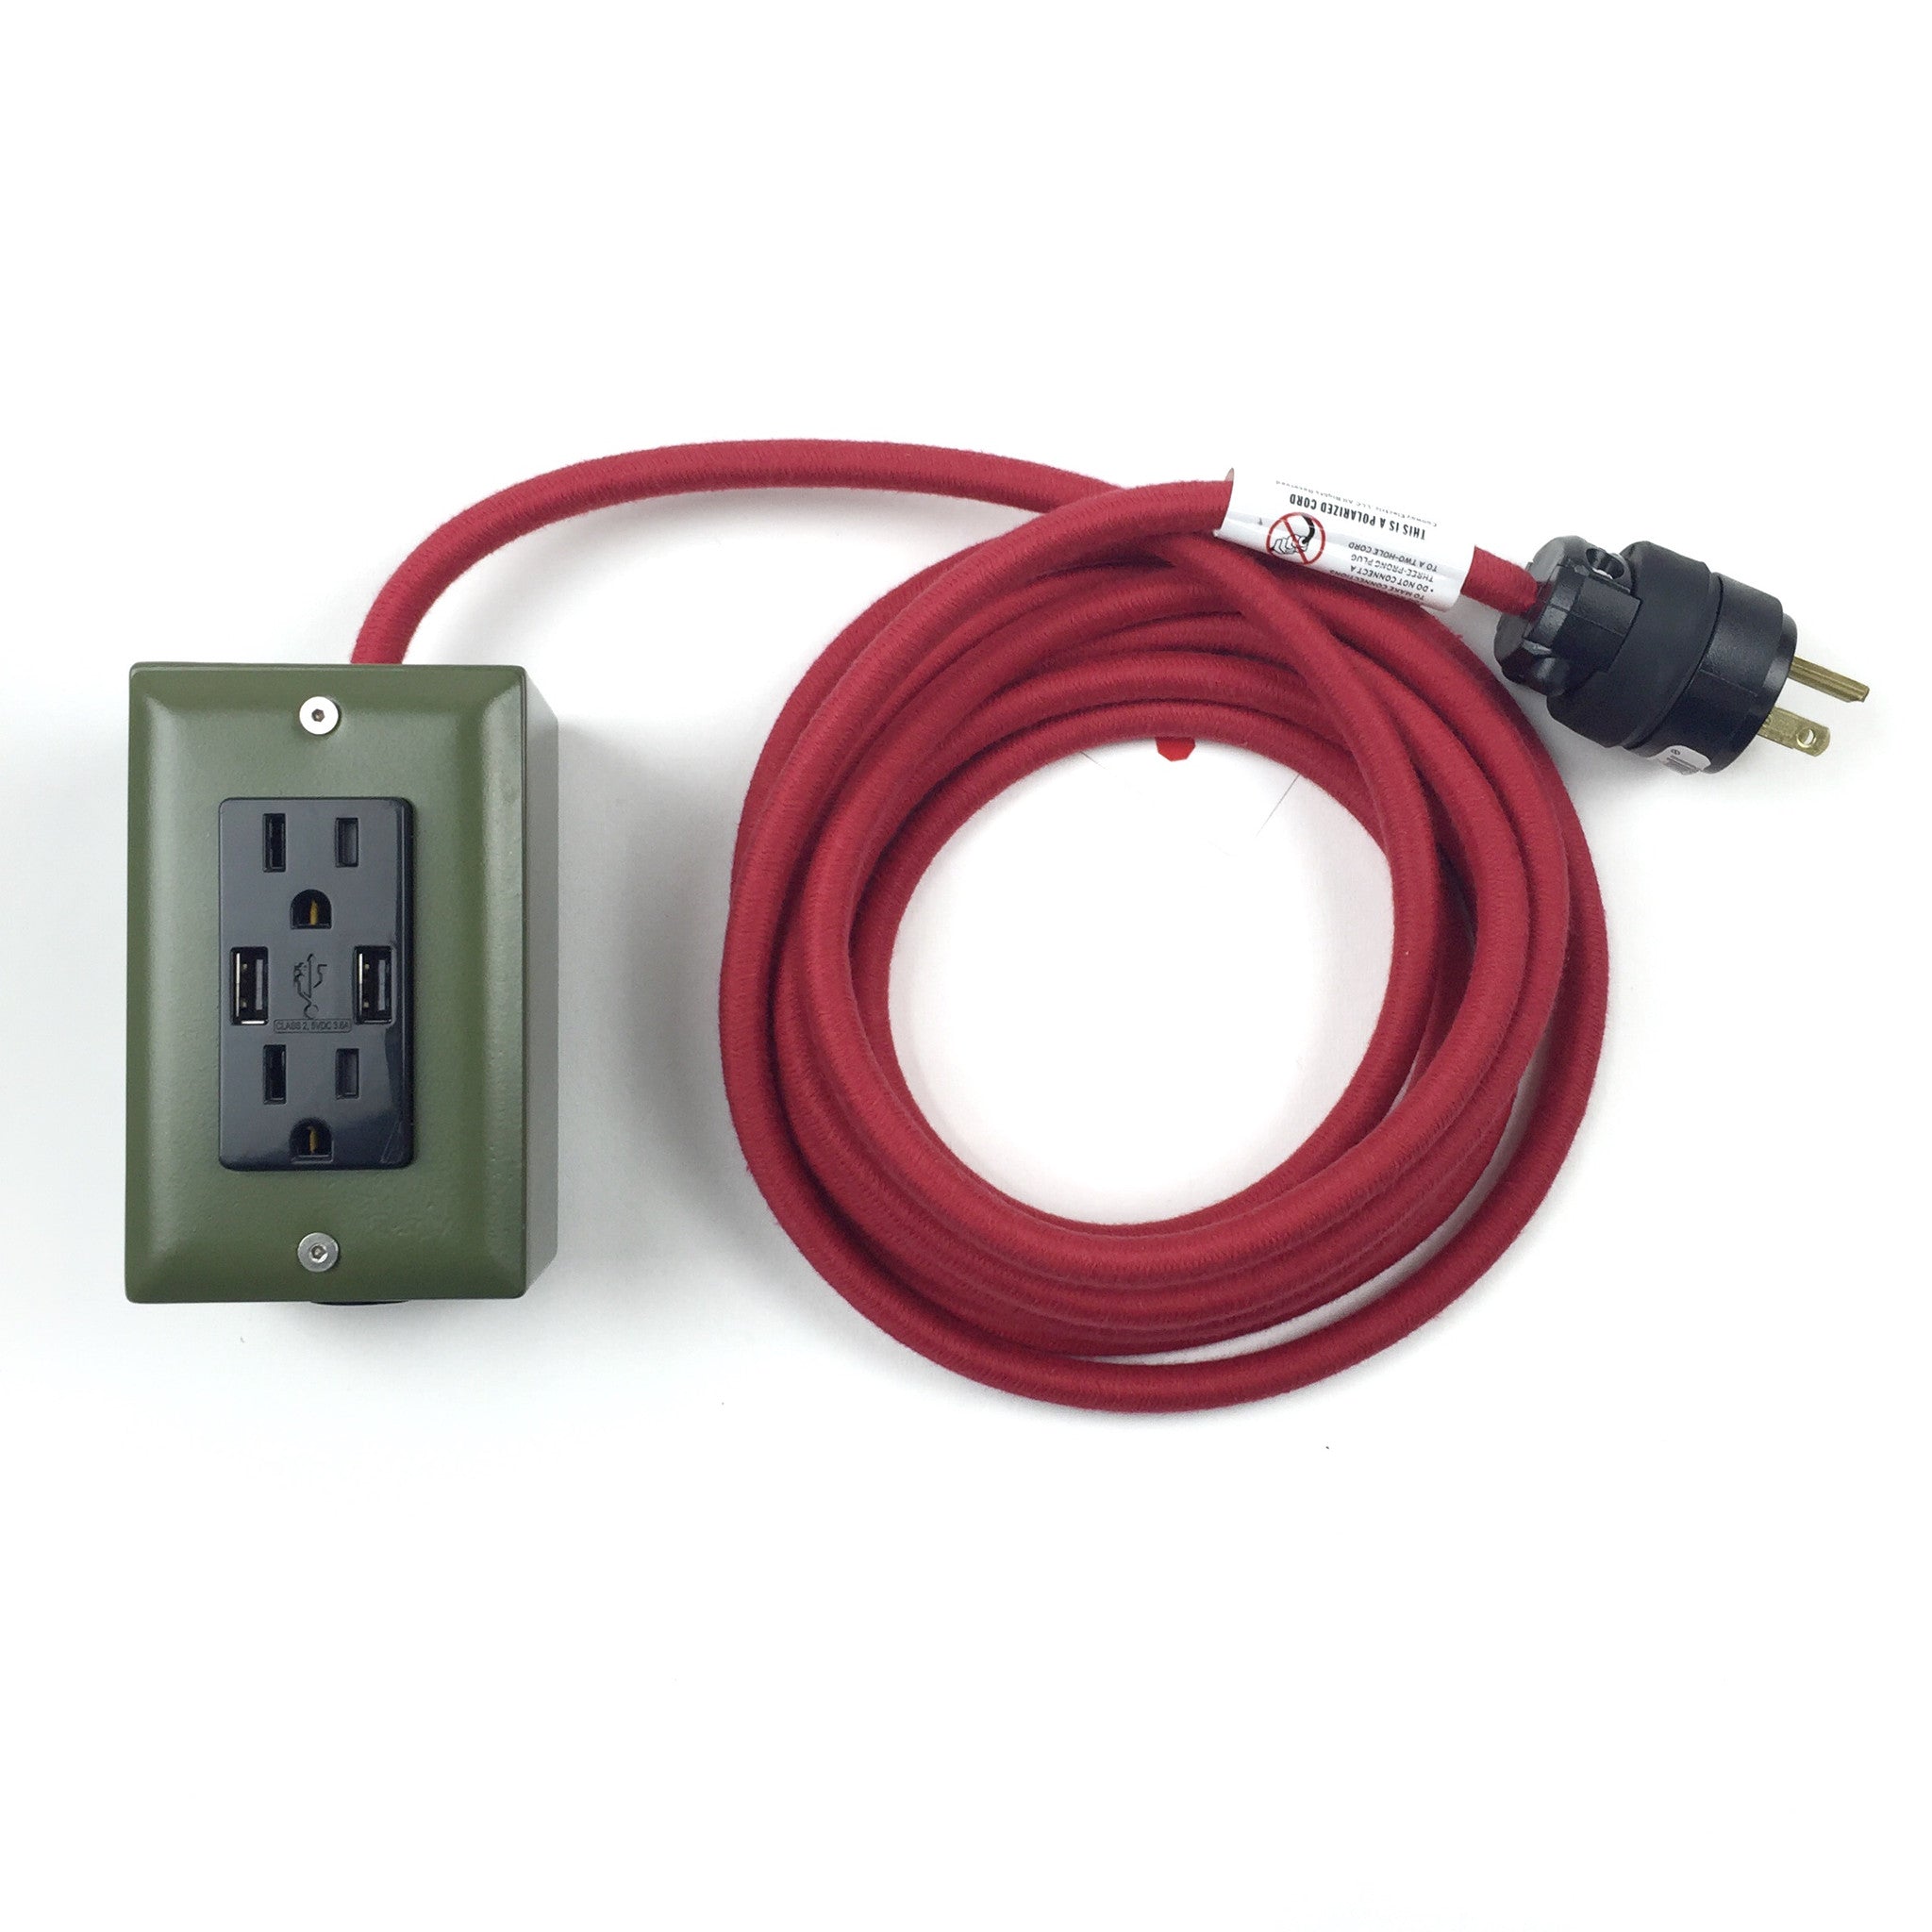 The First Smart Chip Extension Cord - 12' Extō Dual-USB, Dual-Outlet - 4077th Green